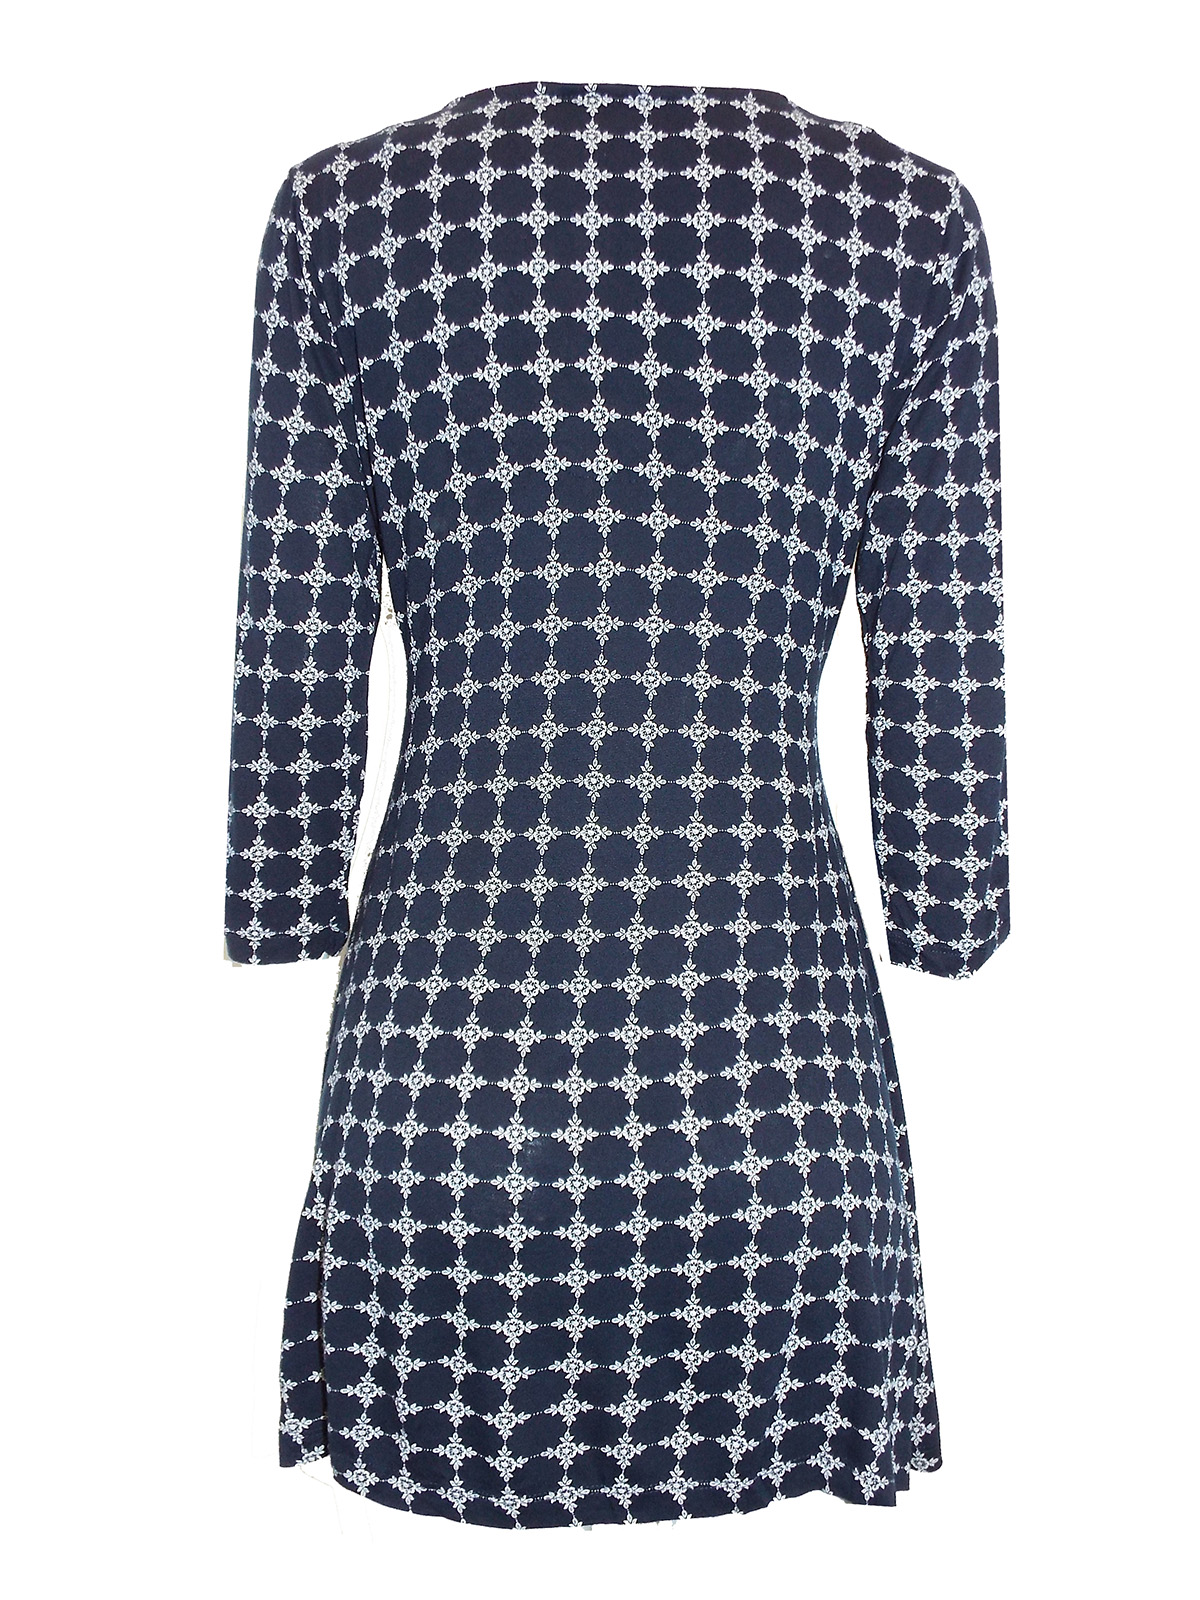 FAT FACE - - Fat Face NAVY Triangle Geo Print Twist Front Cotswold ...